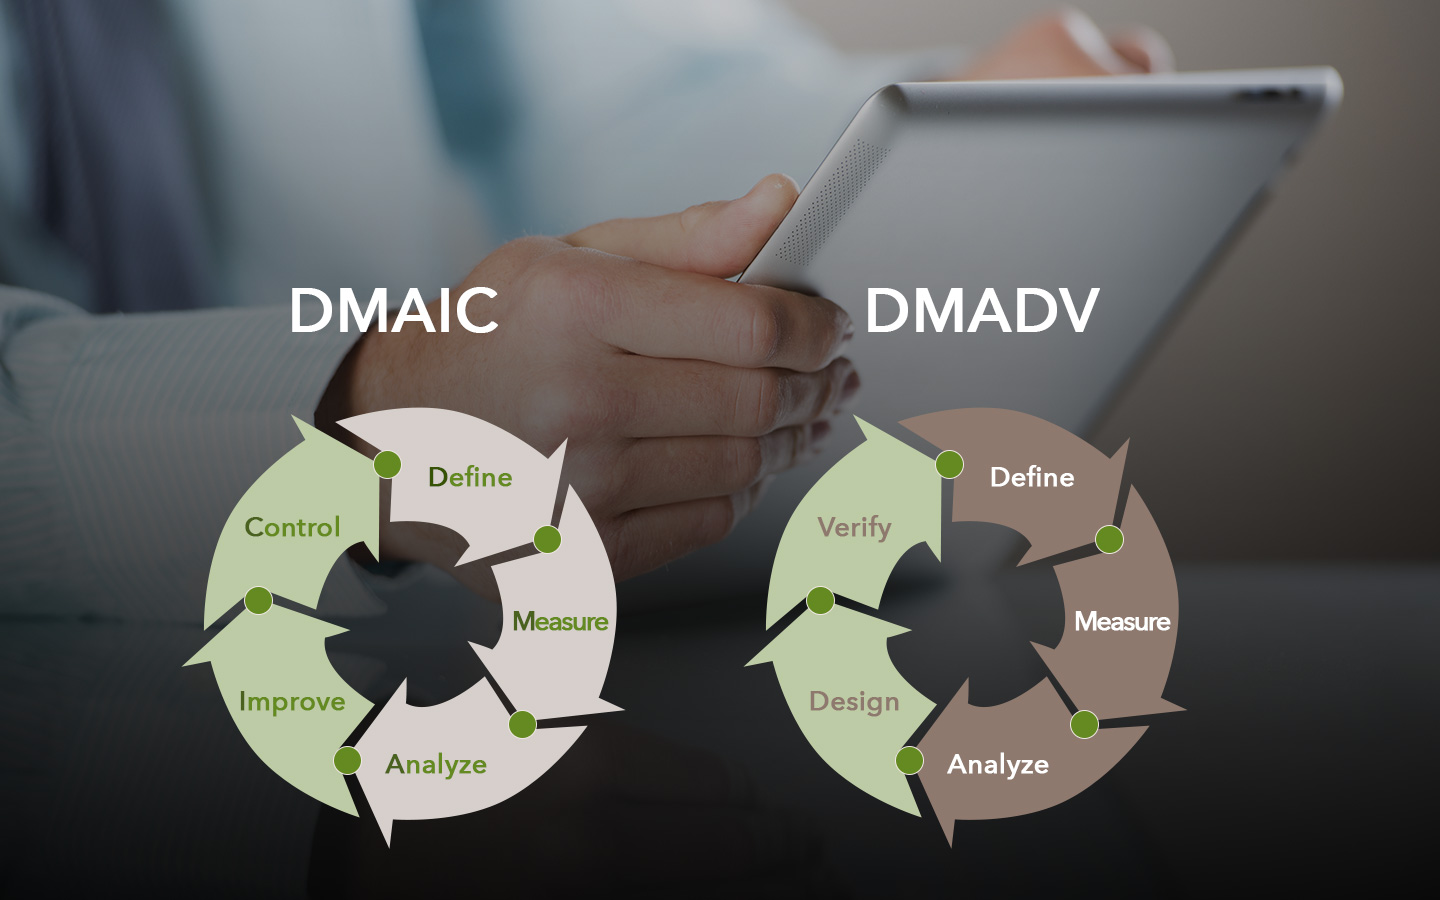 DMAIC and DMADV